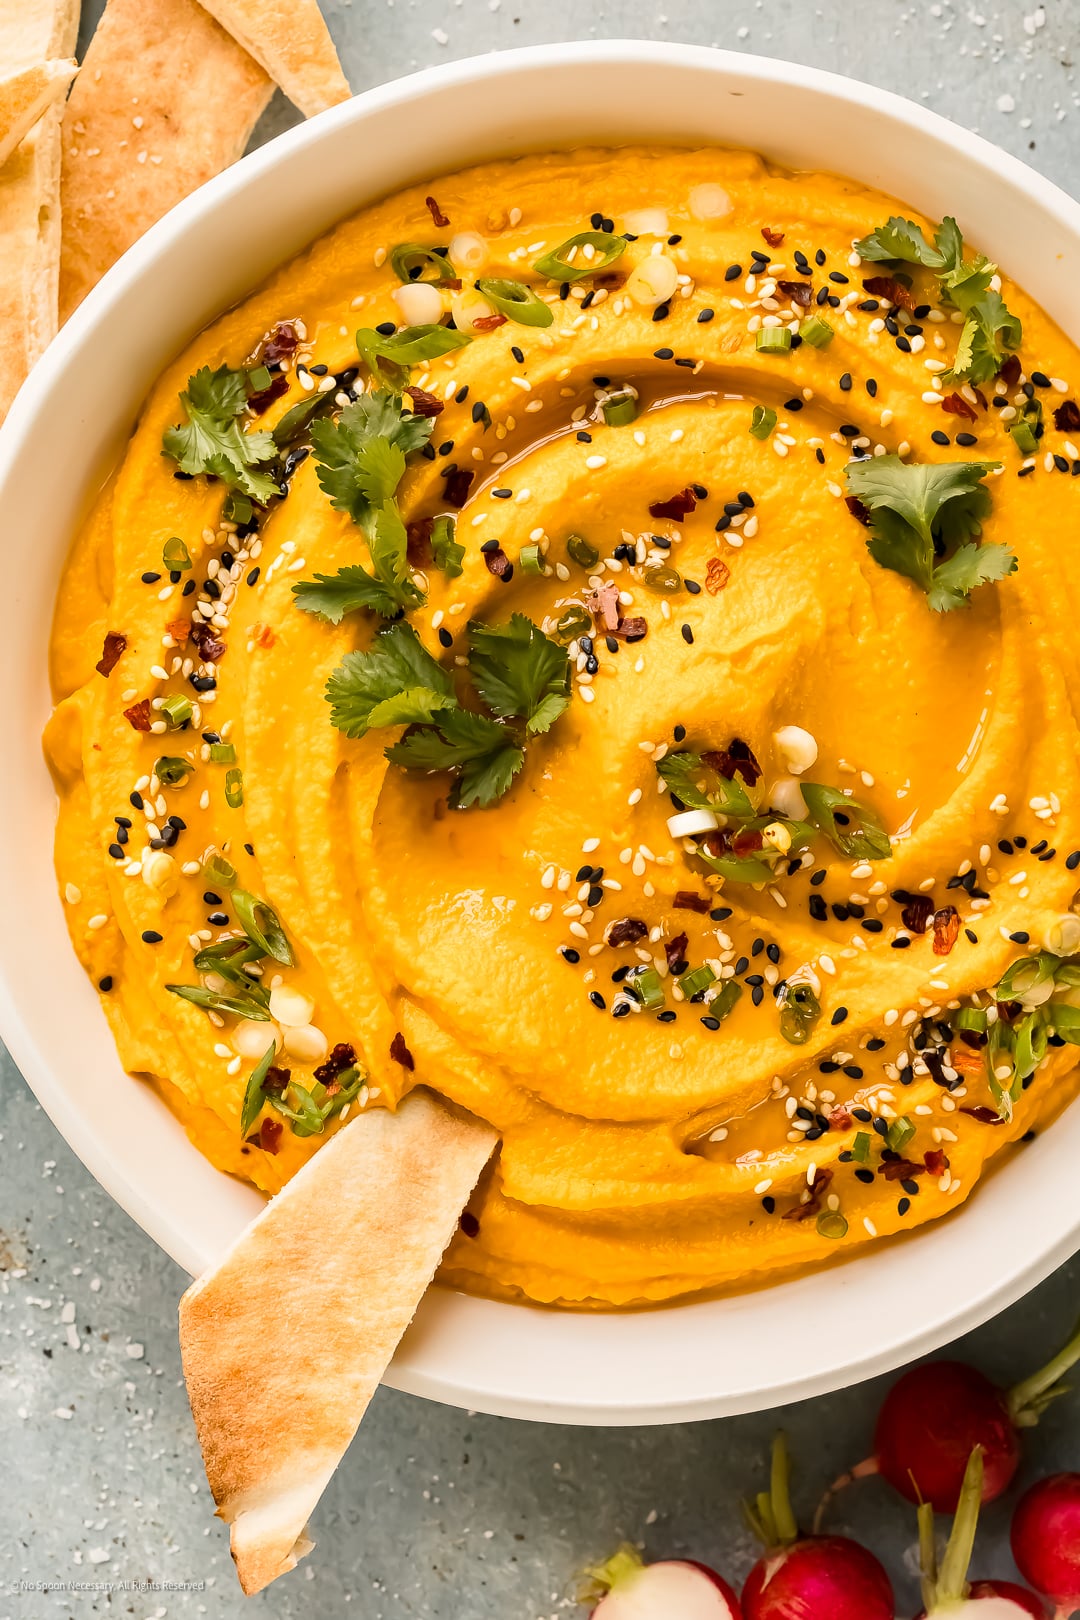 Carrot Hummus: Creamy-Dreamy and Ridiculously Easy!